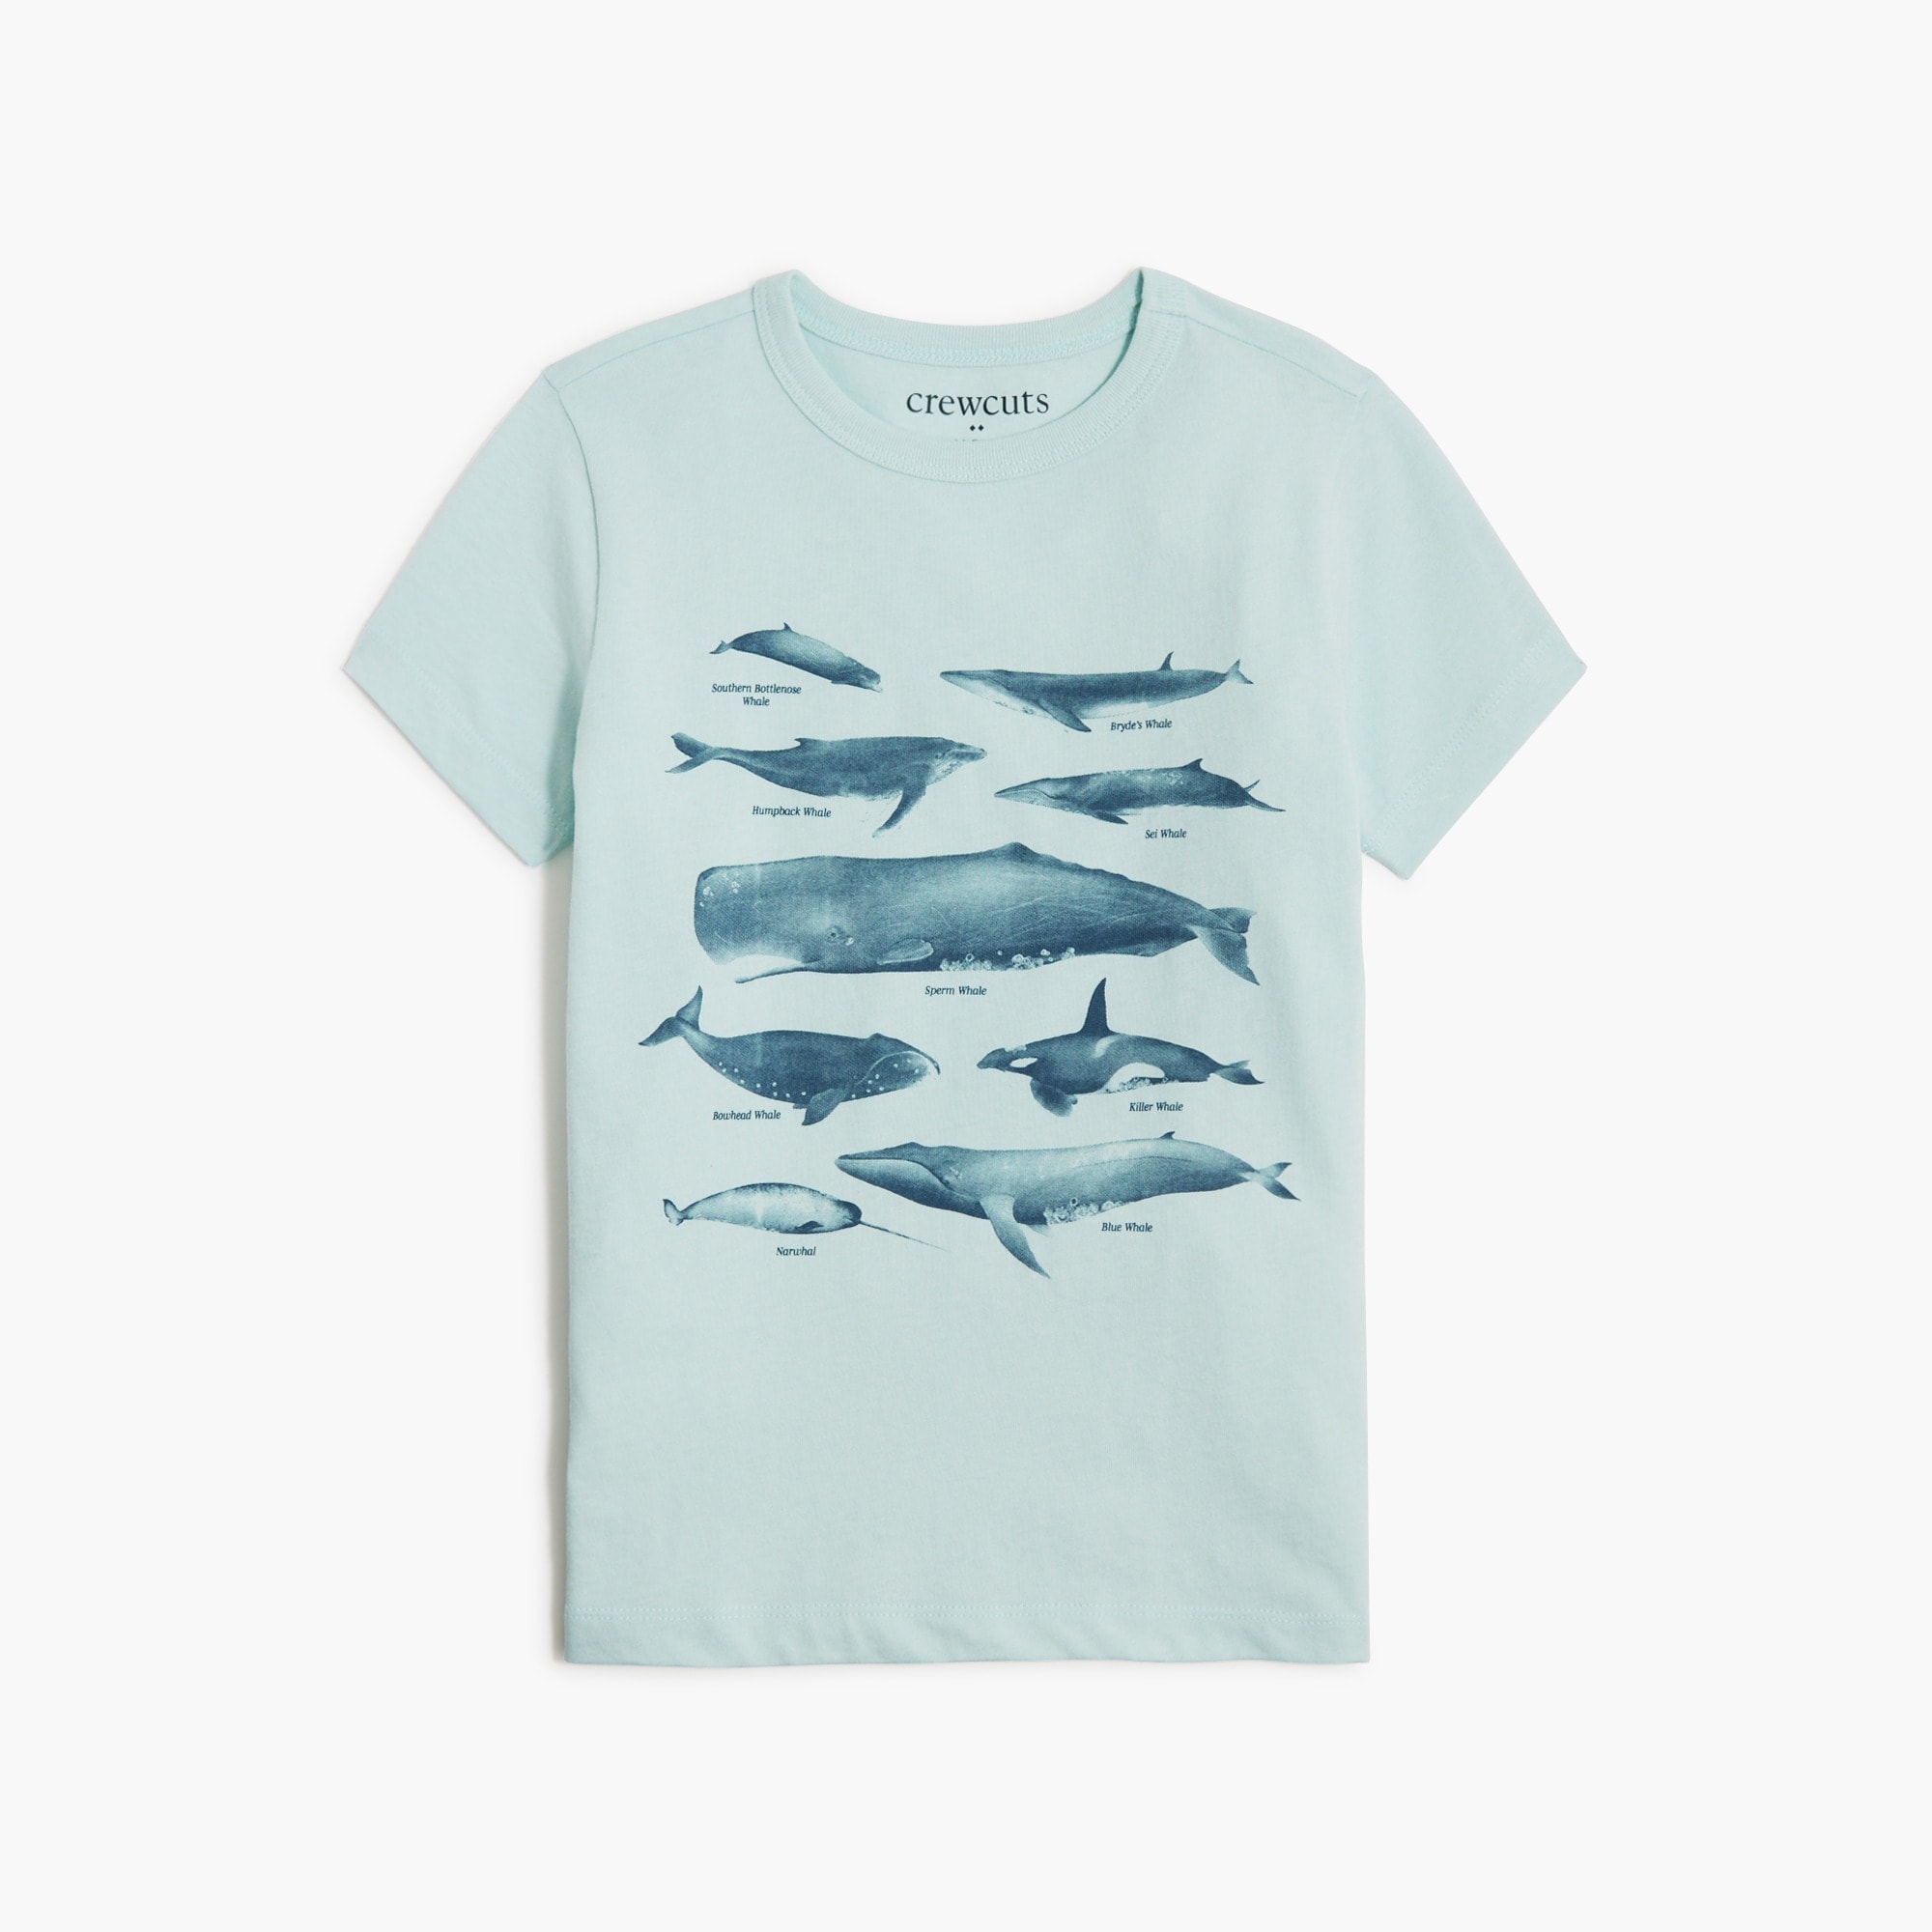  Boys' whale graphic tee